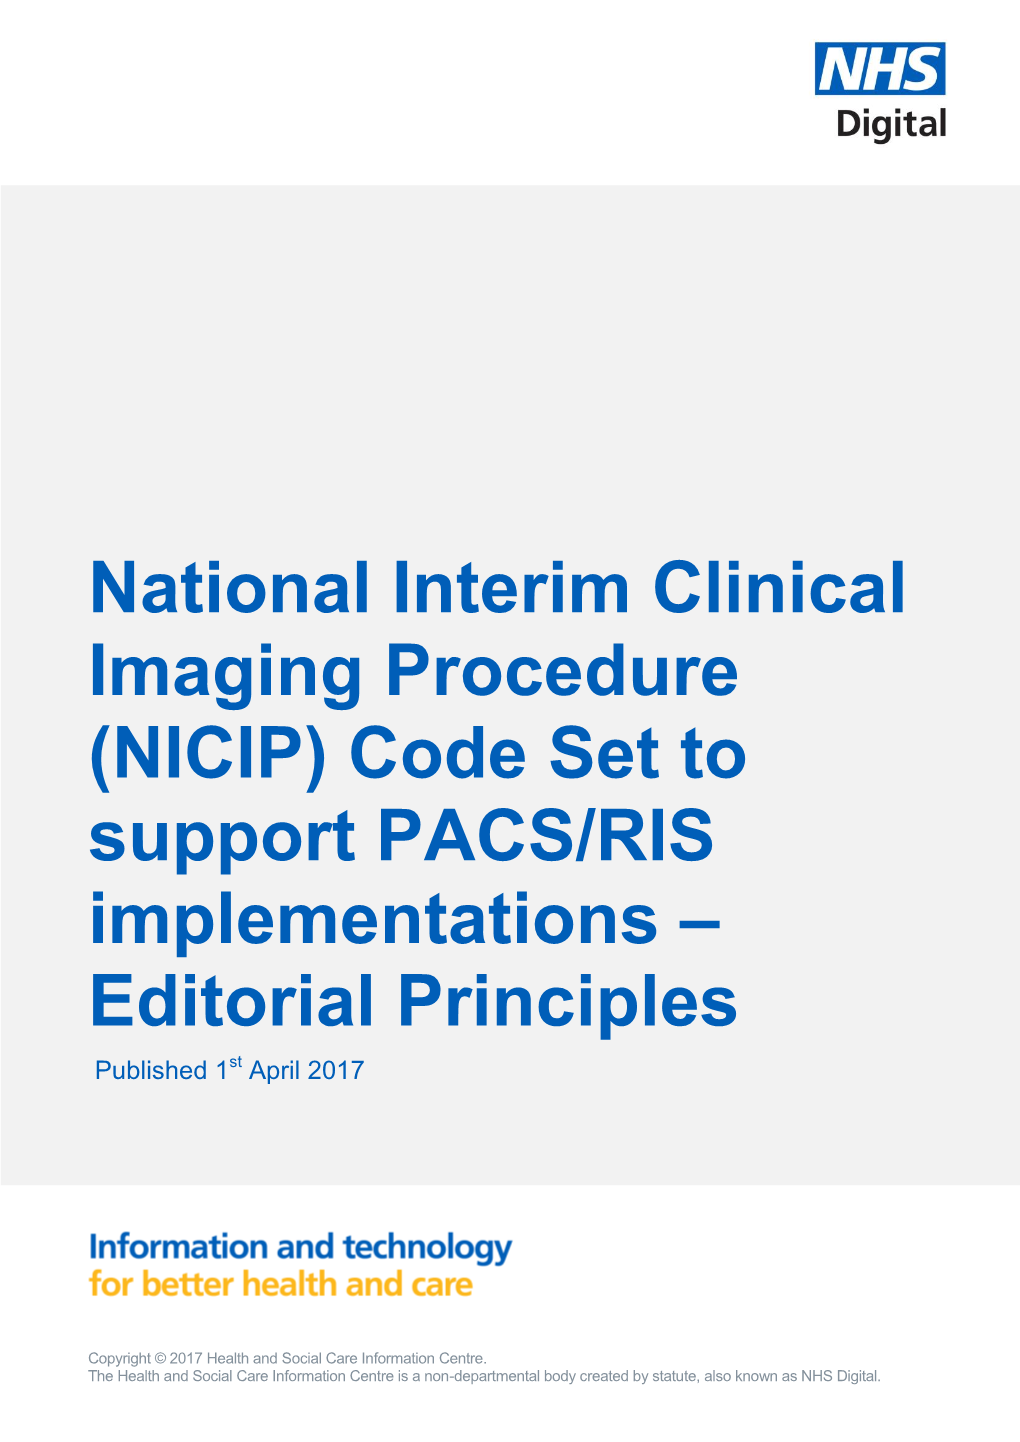 (NICIP) Code Set to Support PACS/RIS Implementations – Editorial Principles Published 1St April 2017